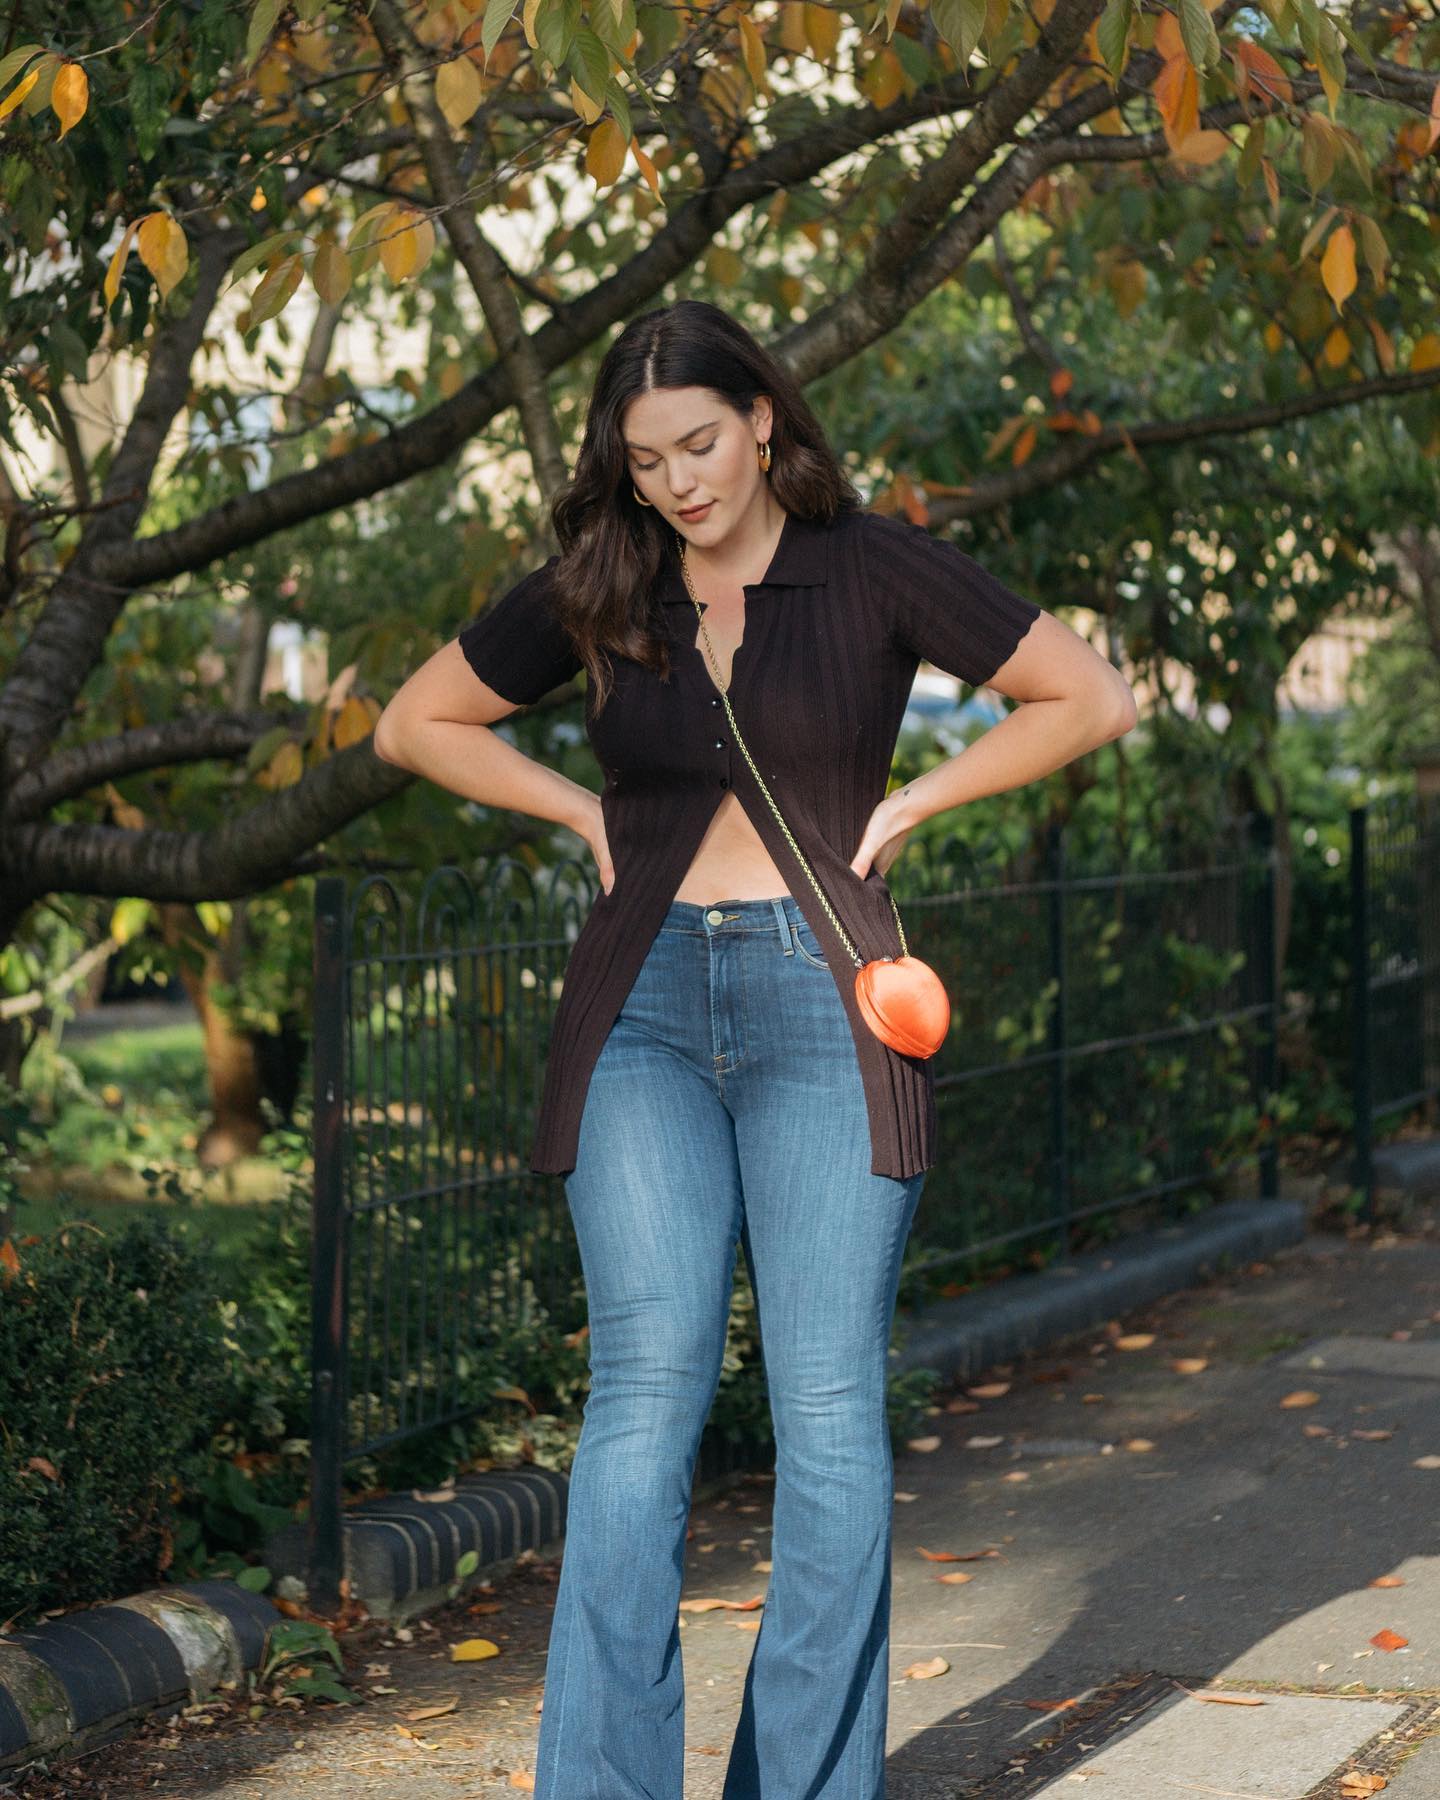 10 Pairs of Butt-Lifting Jeans That Look Amazing